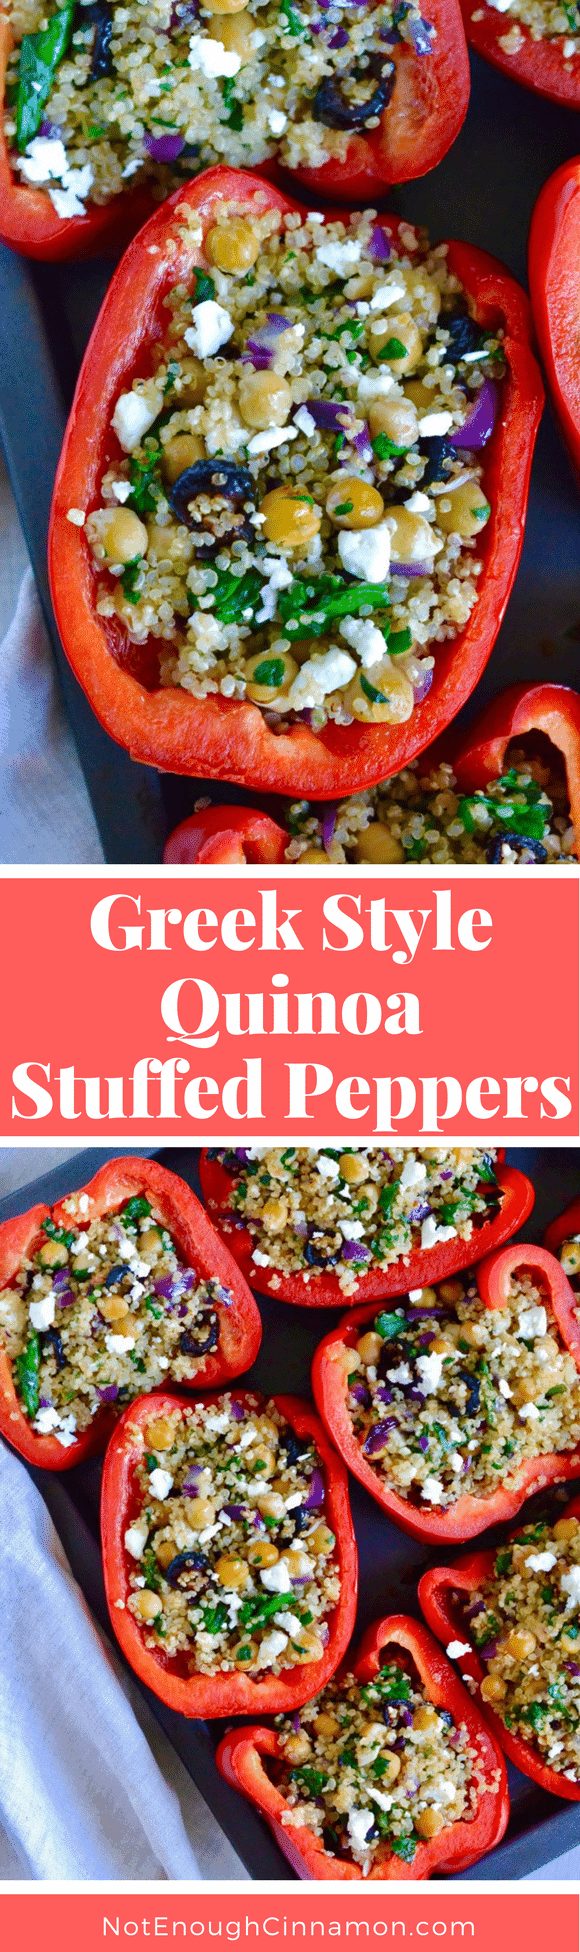 Greek Style Quinoa Stuffed Peppers - A delicious and healthy vegetarian meal. Find the recipe on NotEnoughCinnamon.com